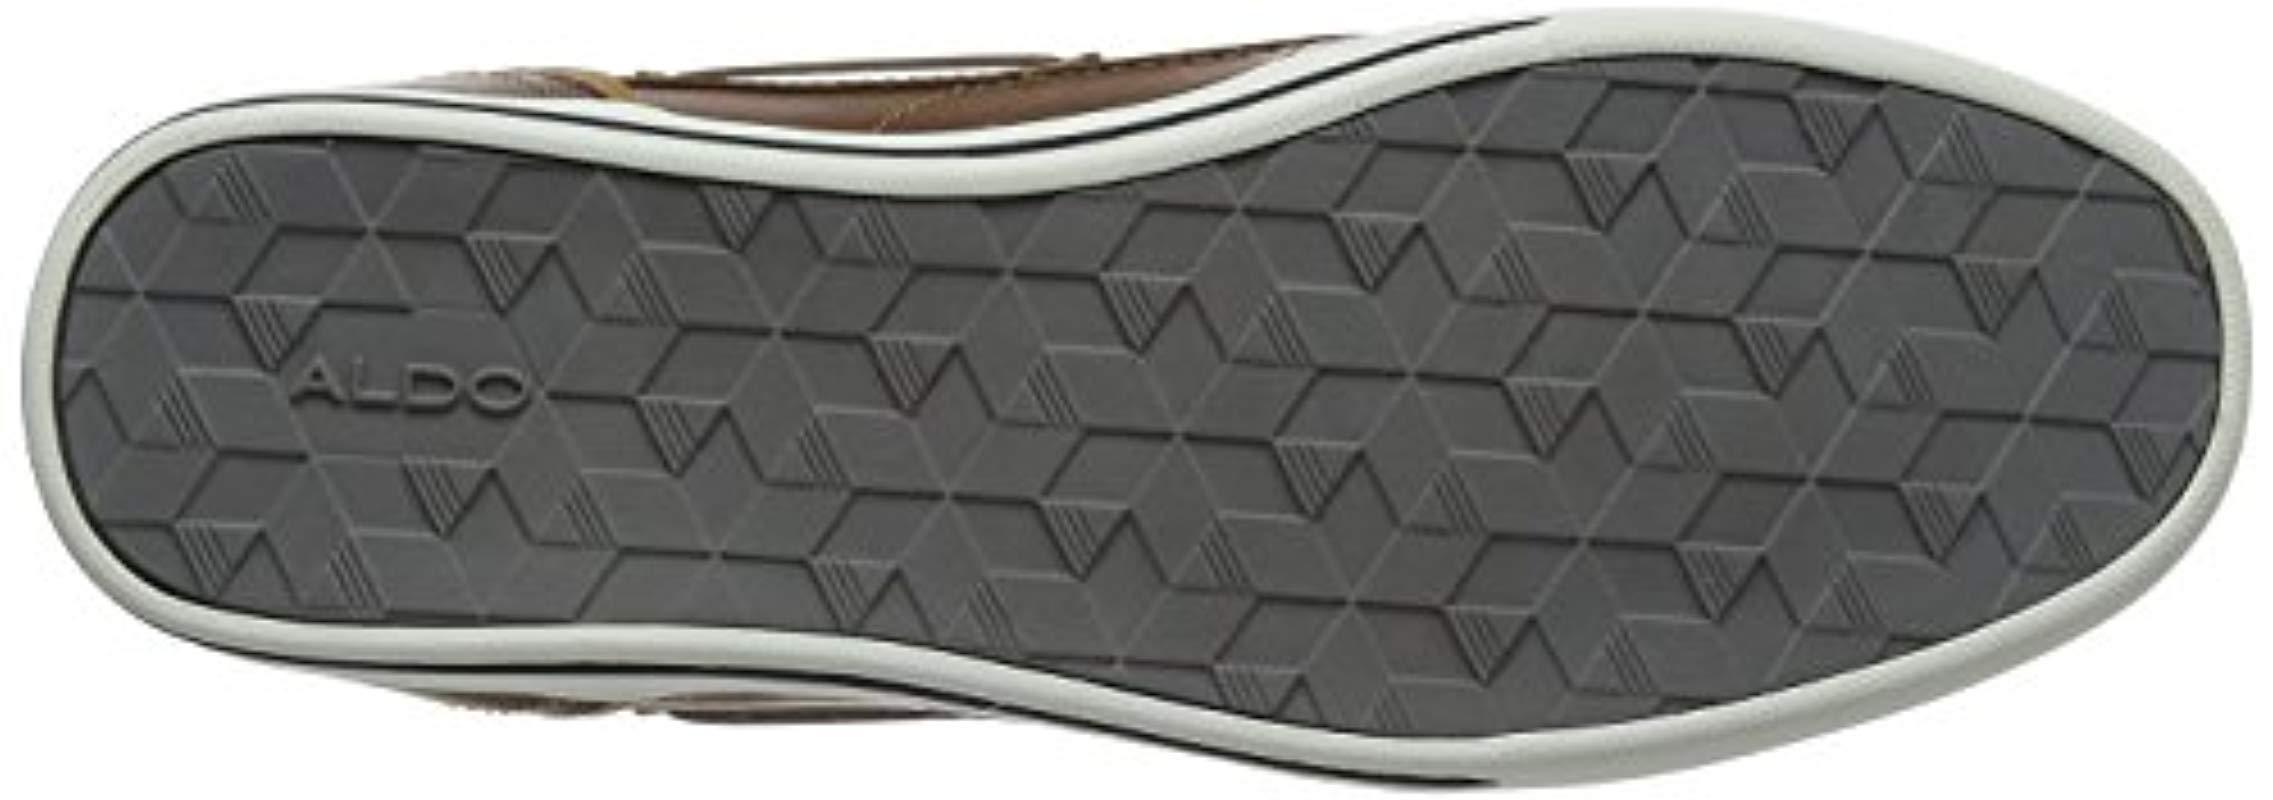 Ongaro Boat Shoes Shoes Men's valimore.com